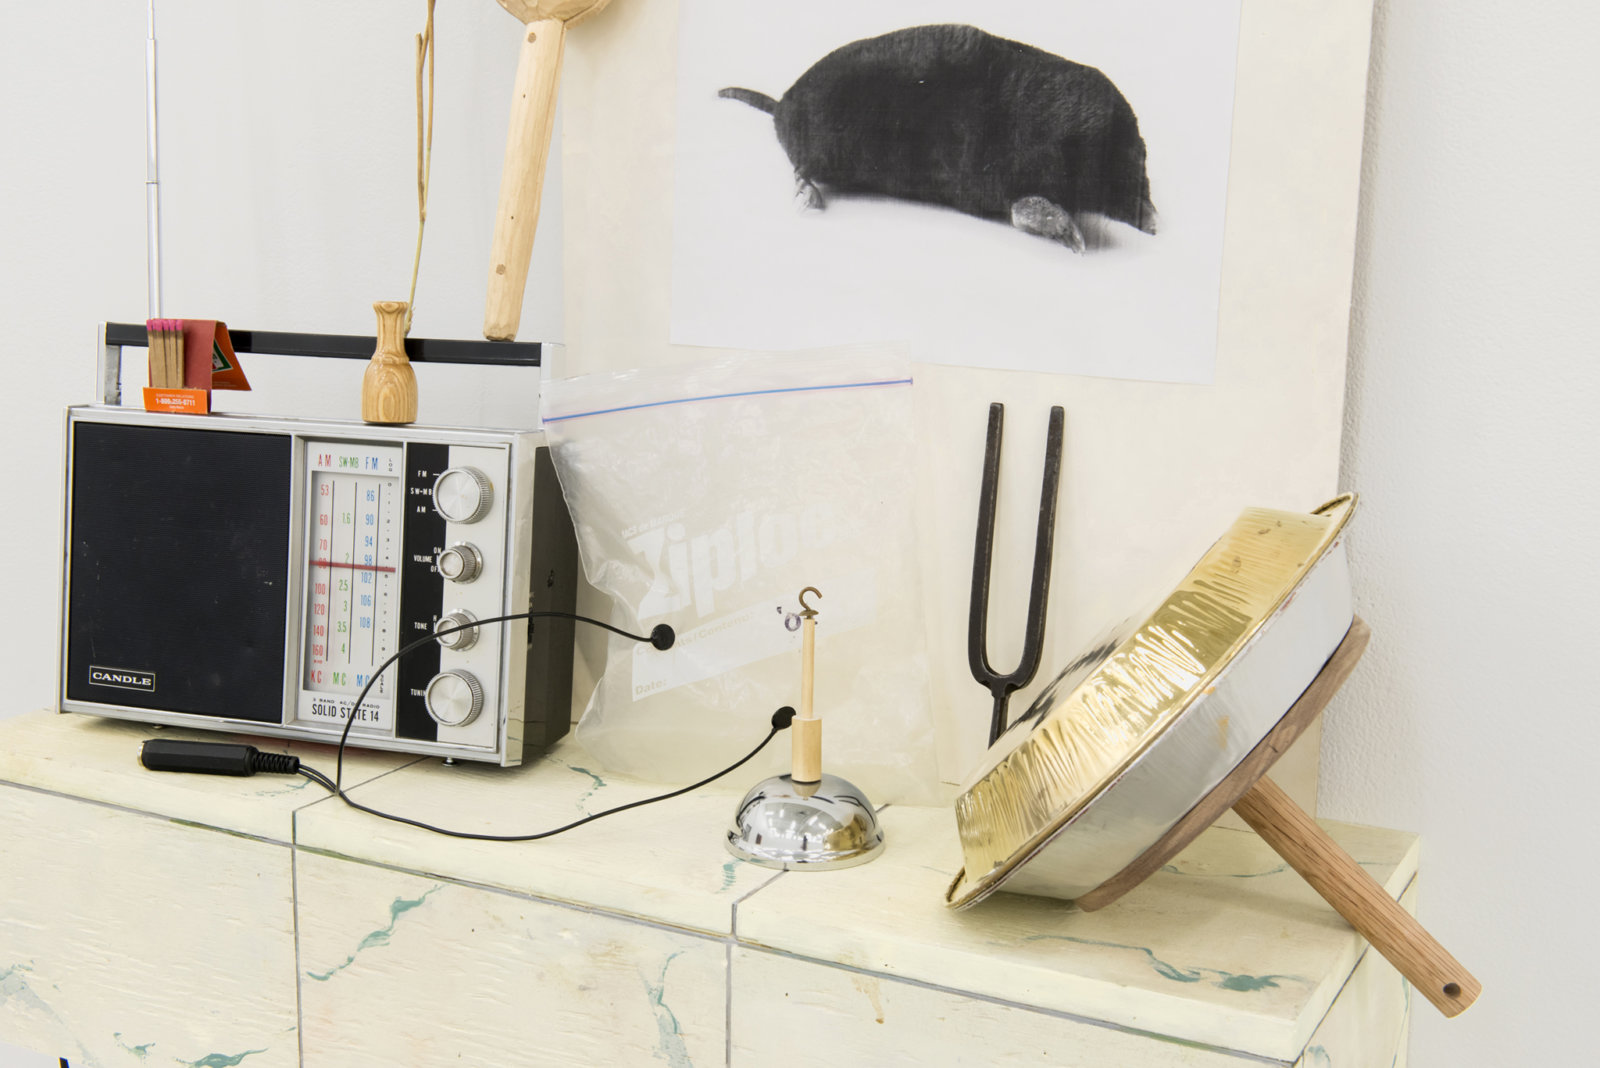 Ashes Withyman, Cetus, Compass, River, Furnas, Musca, Altar, Cup (detail), 2017–2018, radio, matches, animal call, wood and stone rattle, photocopy, grass, usb flash drive, gold plated tin, sand, ziploc bag with contact microphone, tuning fork, dried grass, bell, painted plywood, 52 x 29 x 9 in. (132 x 74 x 23 cm)